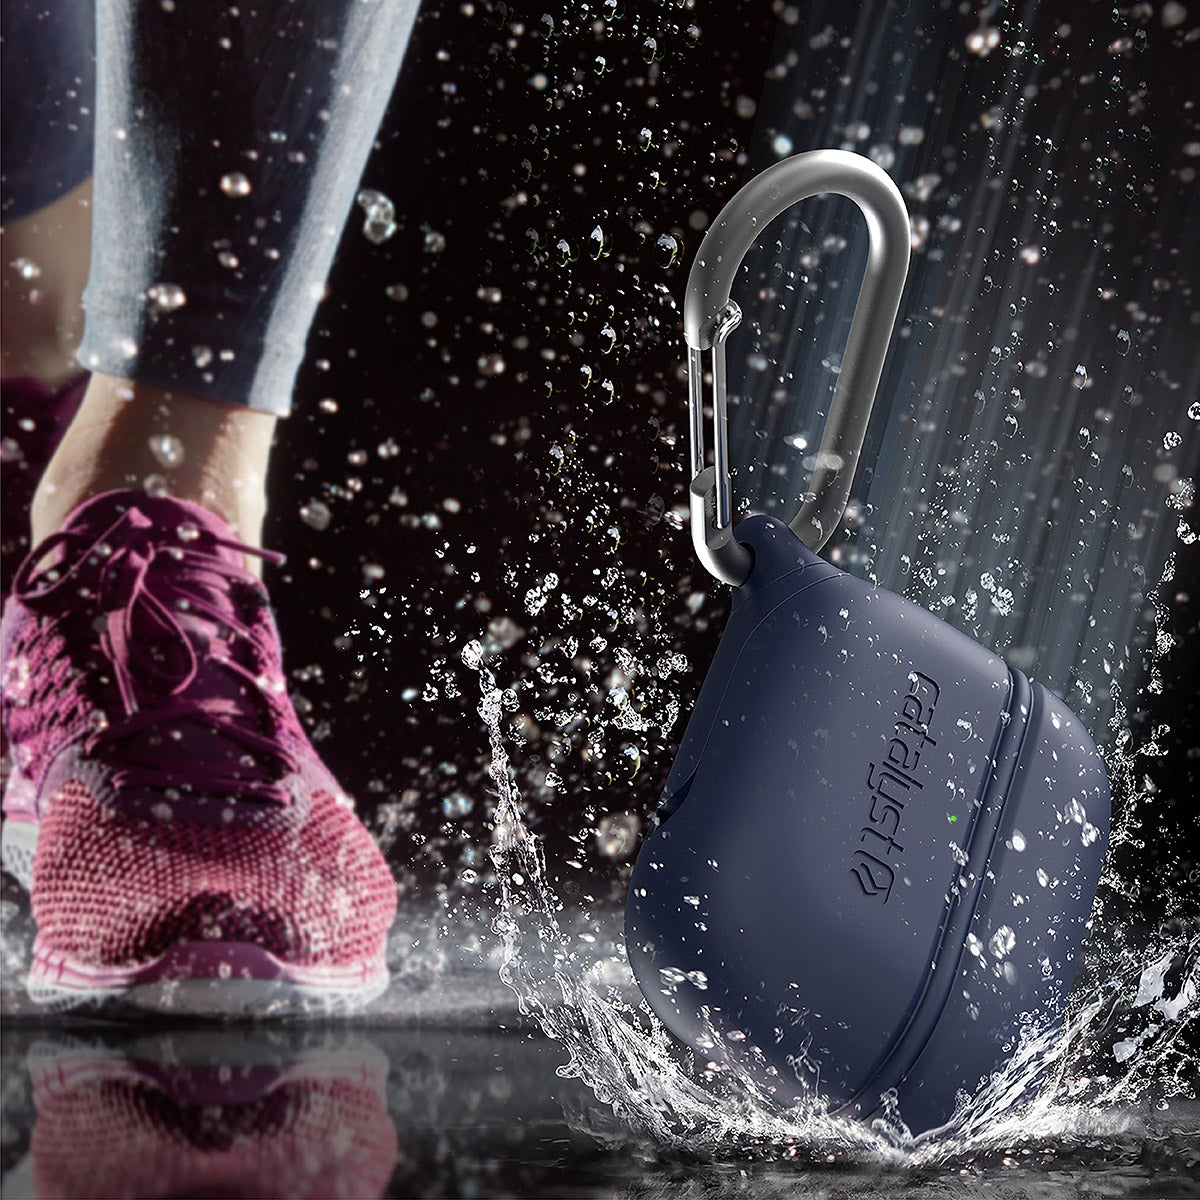 CATAPLAPDPRONAV | catalyst airpods pro gen 2 1 waterproof case carabiner special edition blue dropped and splashes of water running shoes